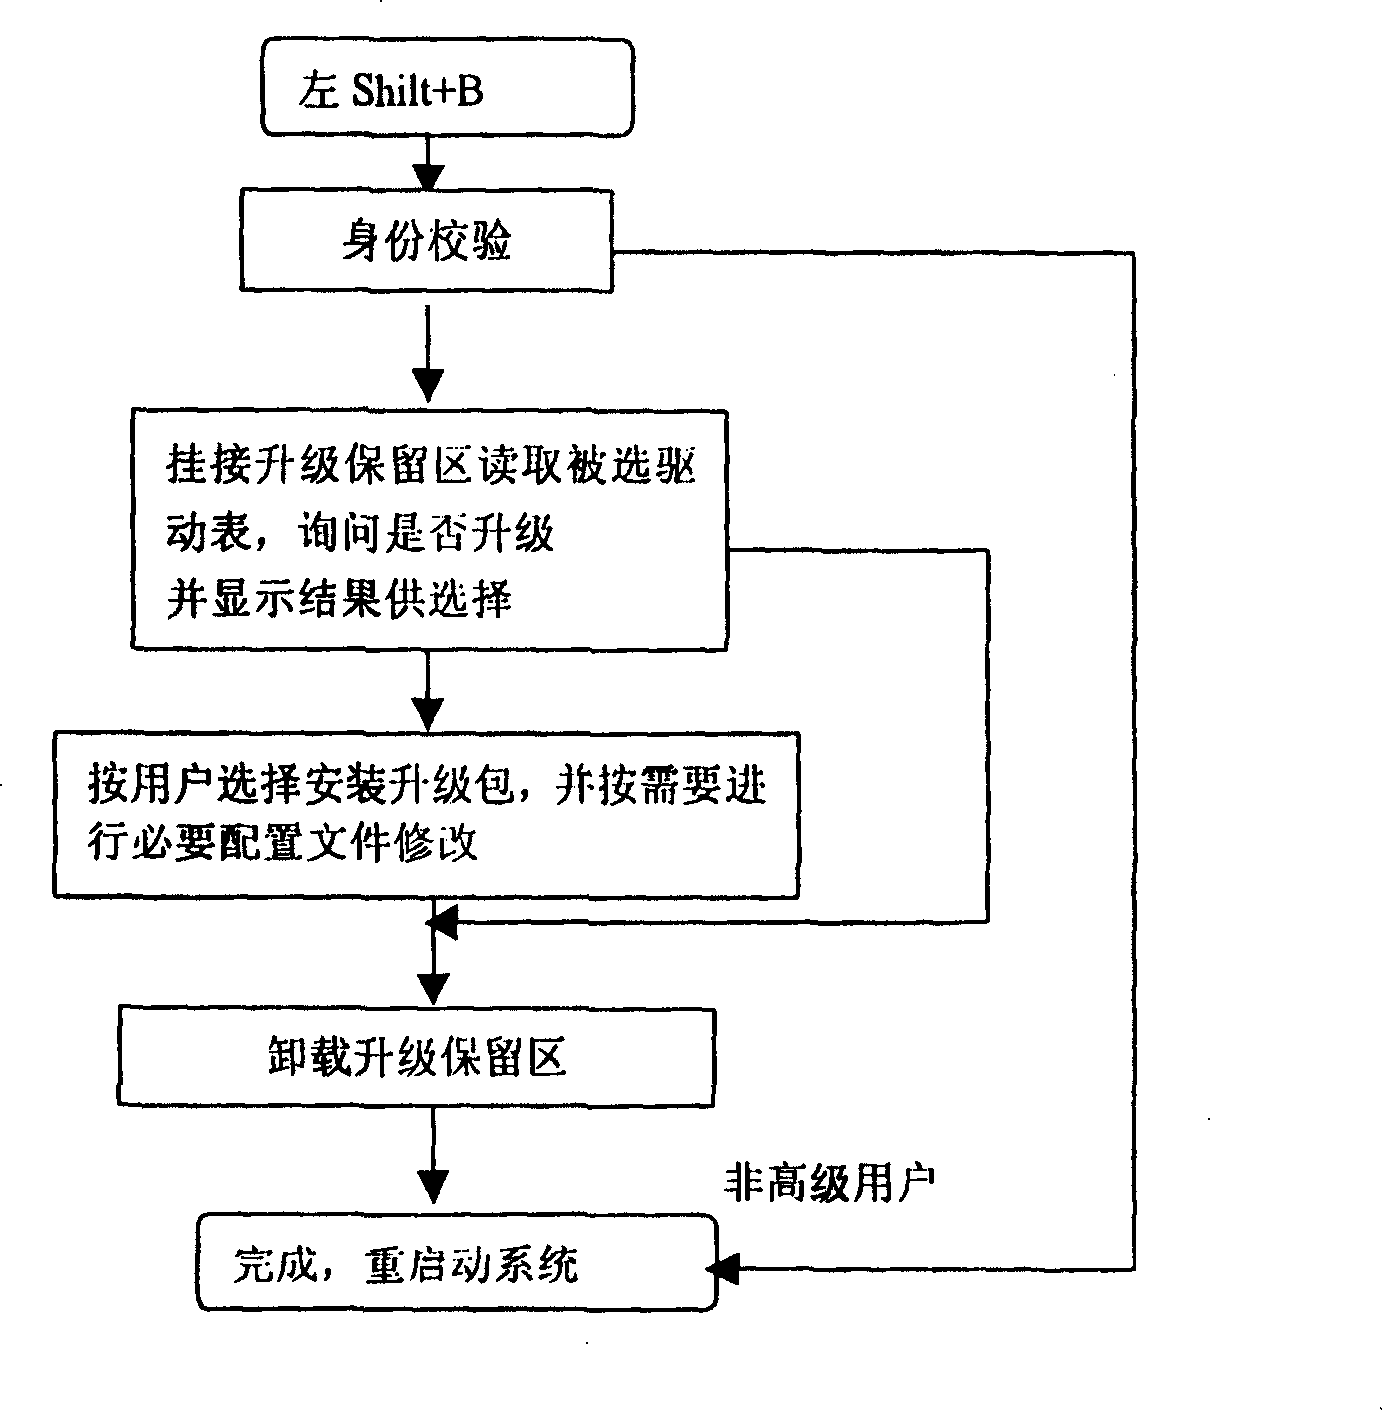 Hardware driving and software updating method based on multiplexed embedded system with expandable form